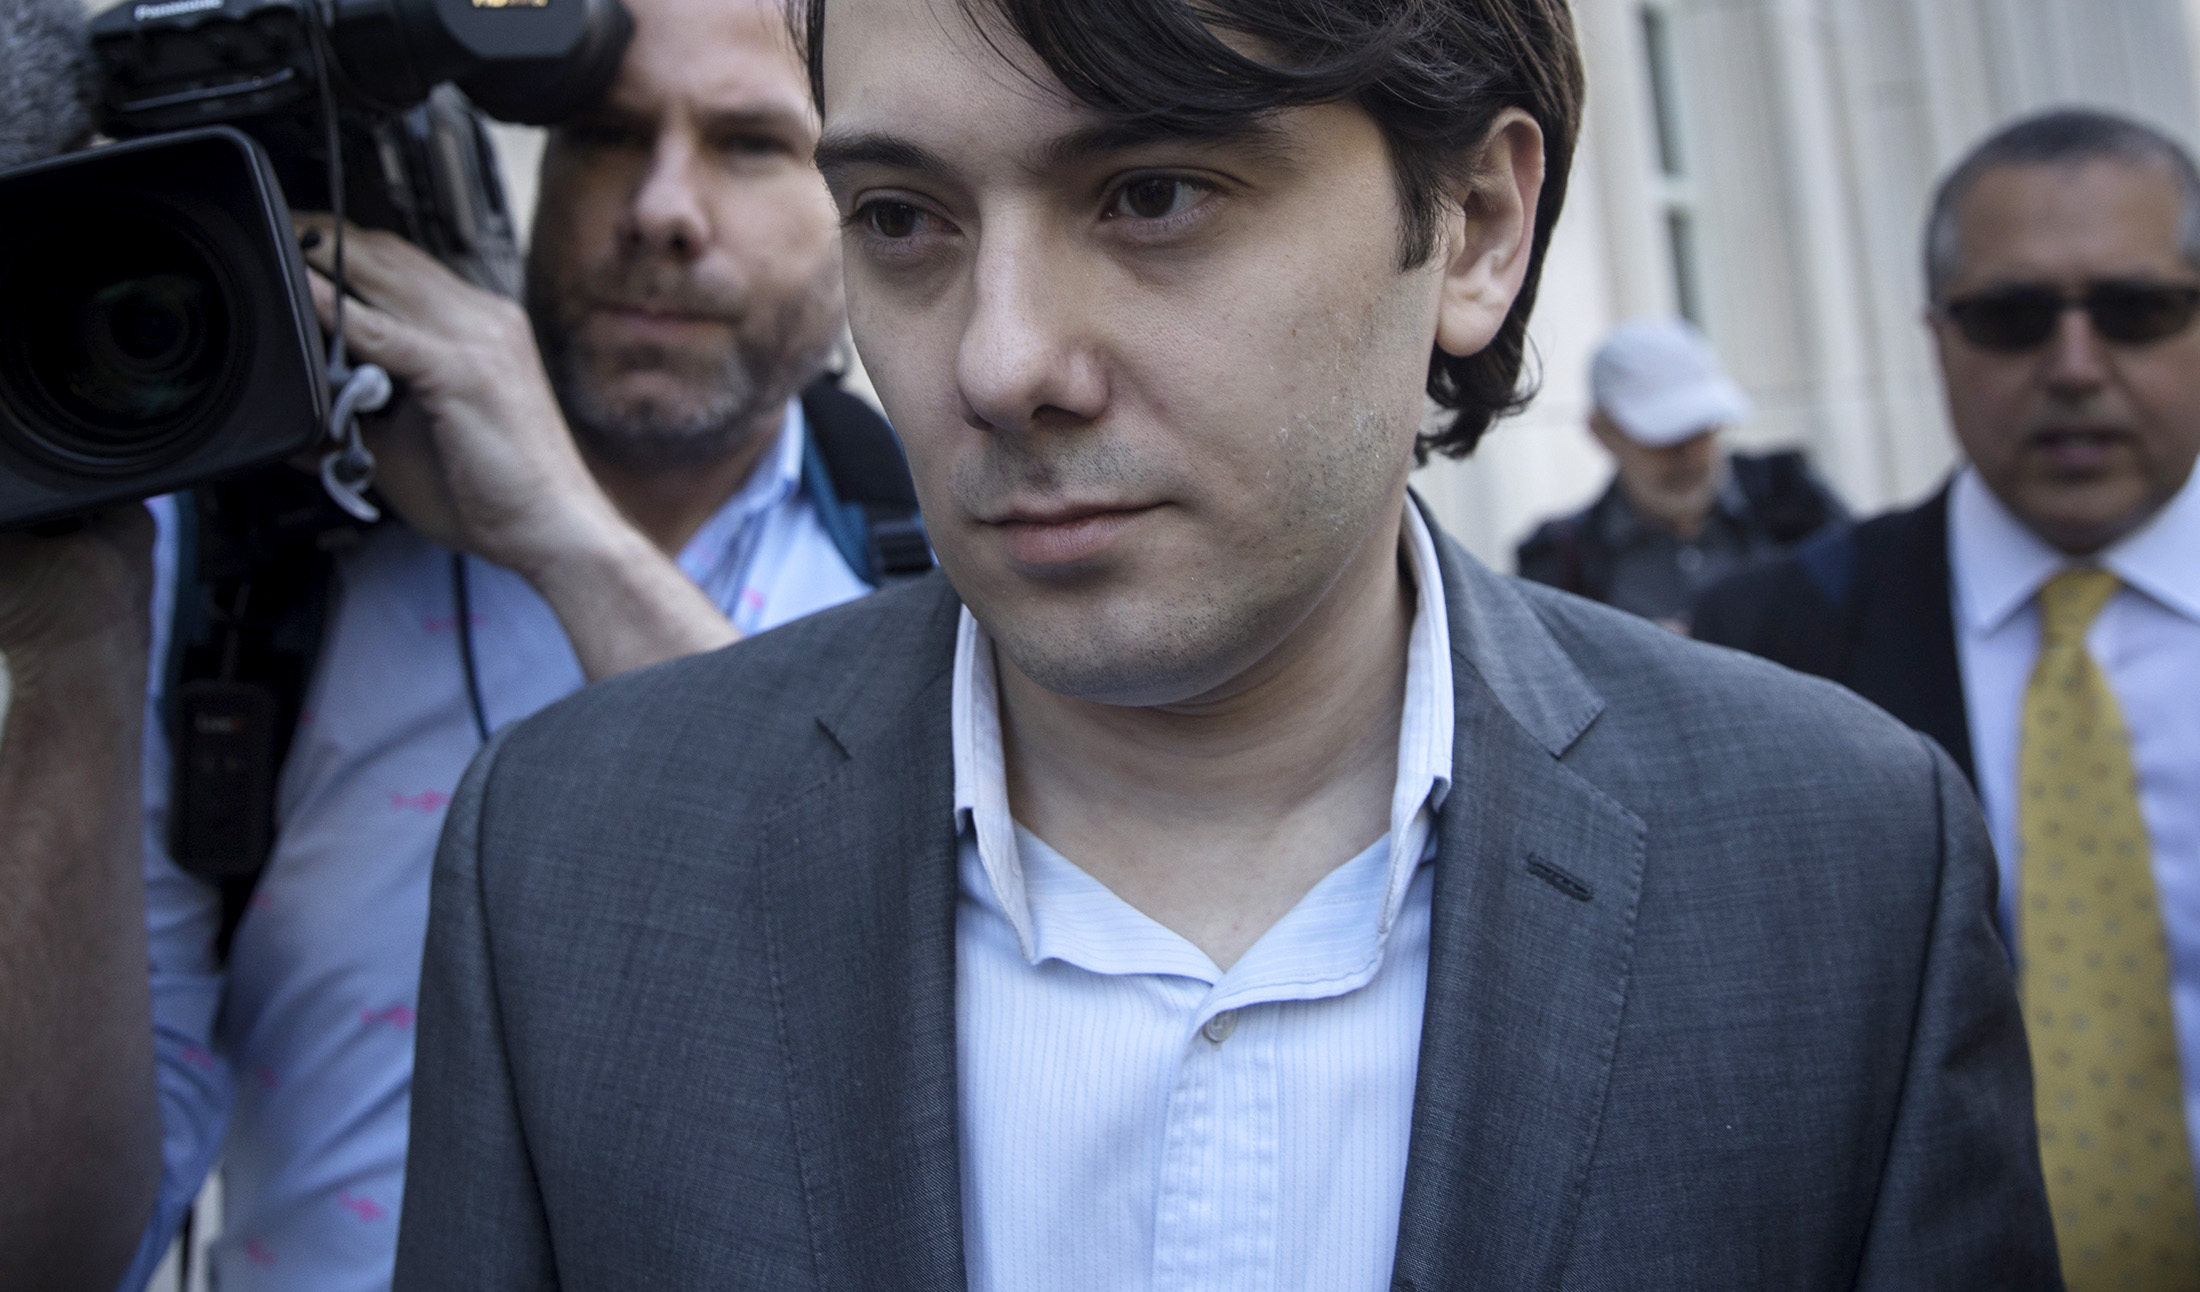 Shkreli outside federal court in the Brooklyn, New York on June 26, 2017.